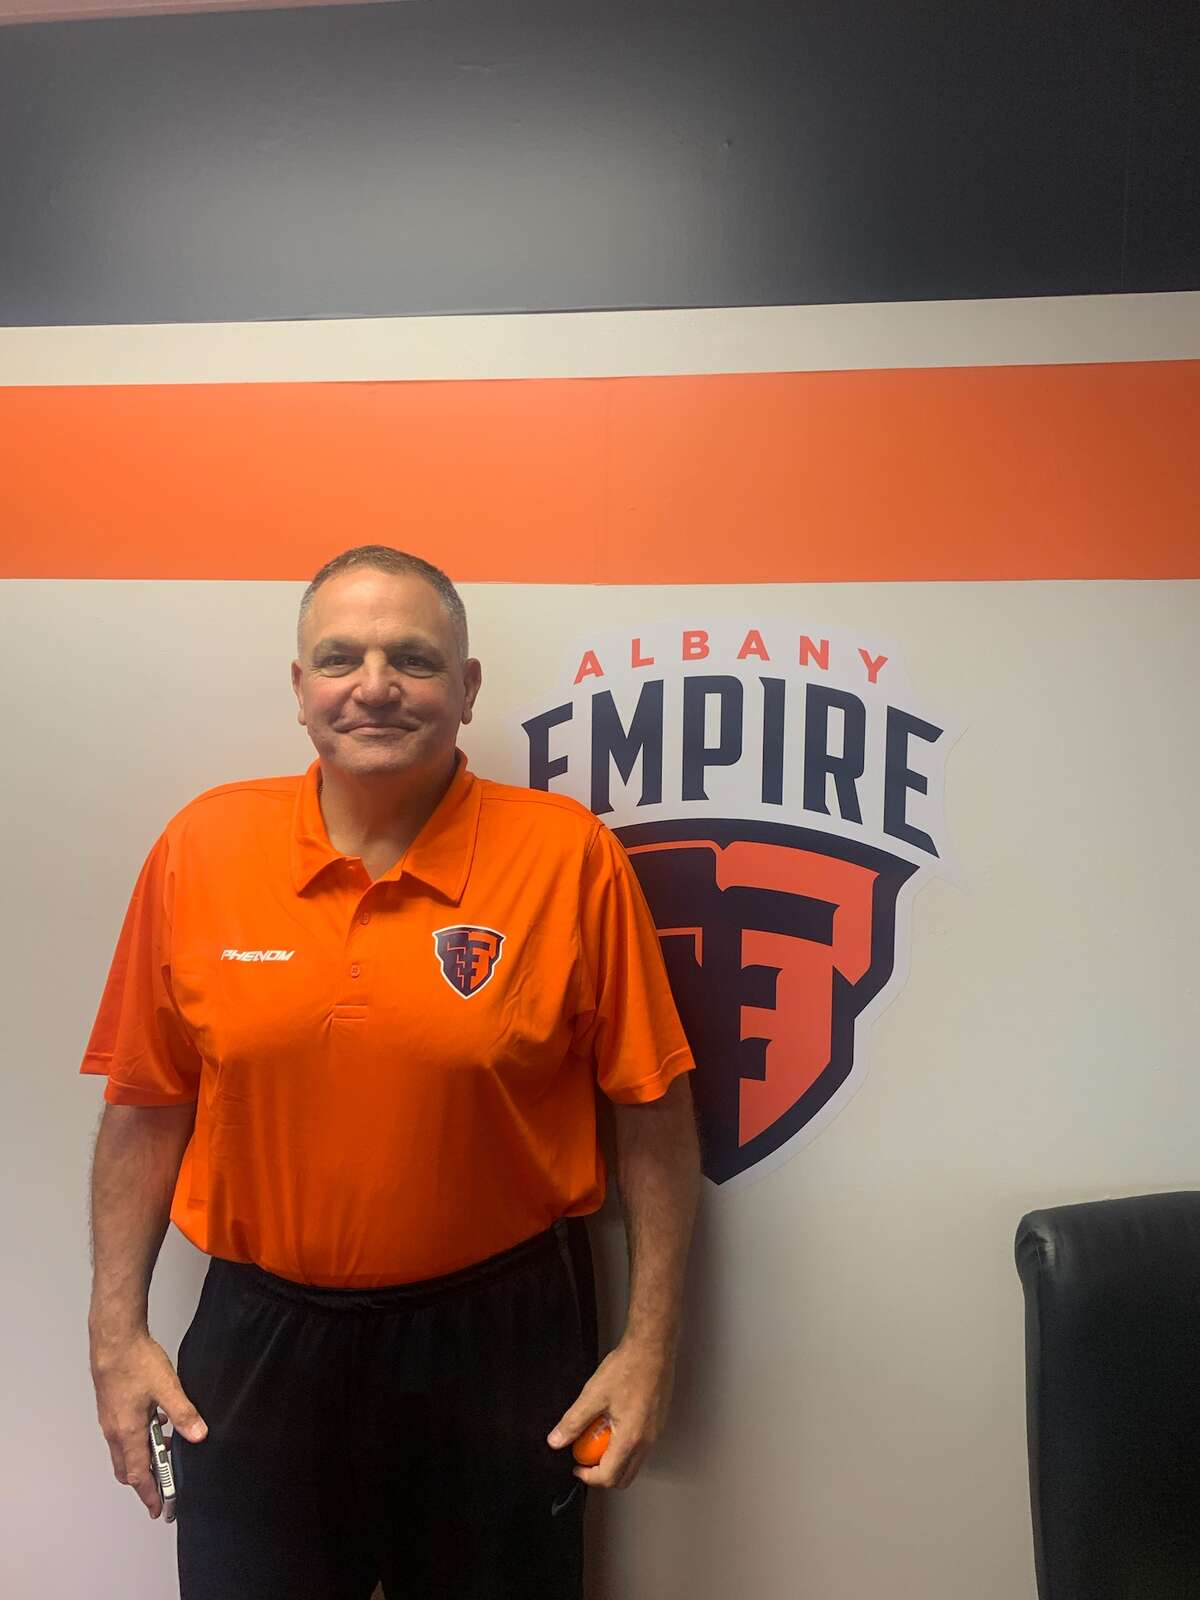 Tom Menas will coach his first game as a head coach in the National Arena League with the Albany Empire on Saturday, May 29, 2021.